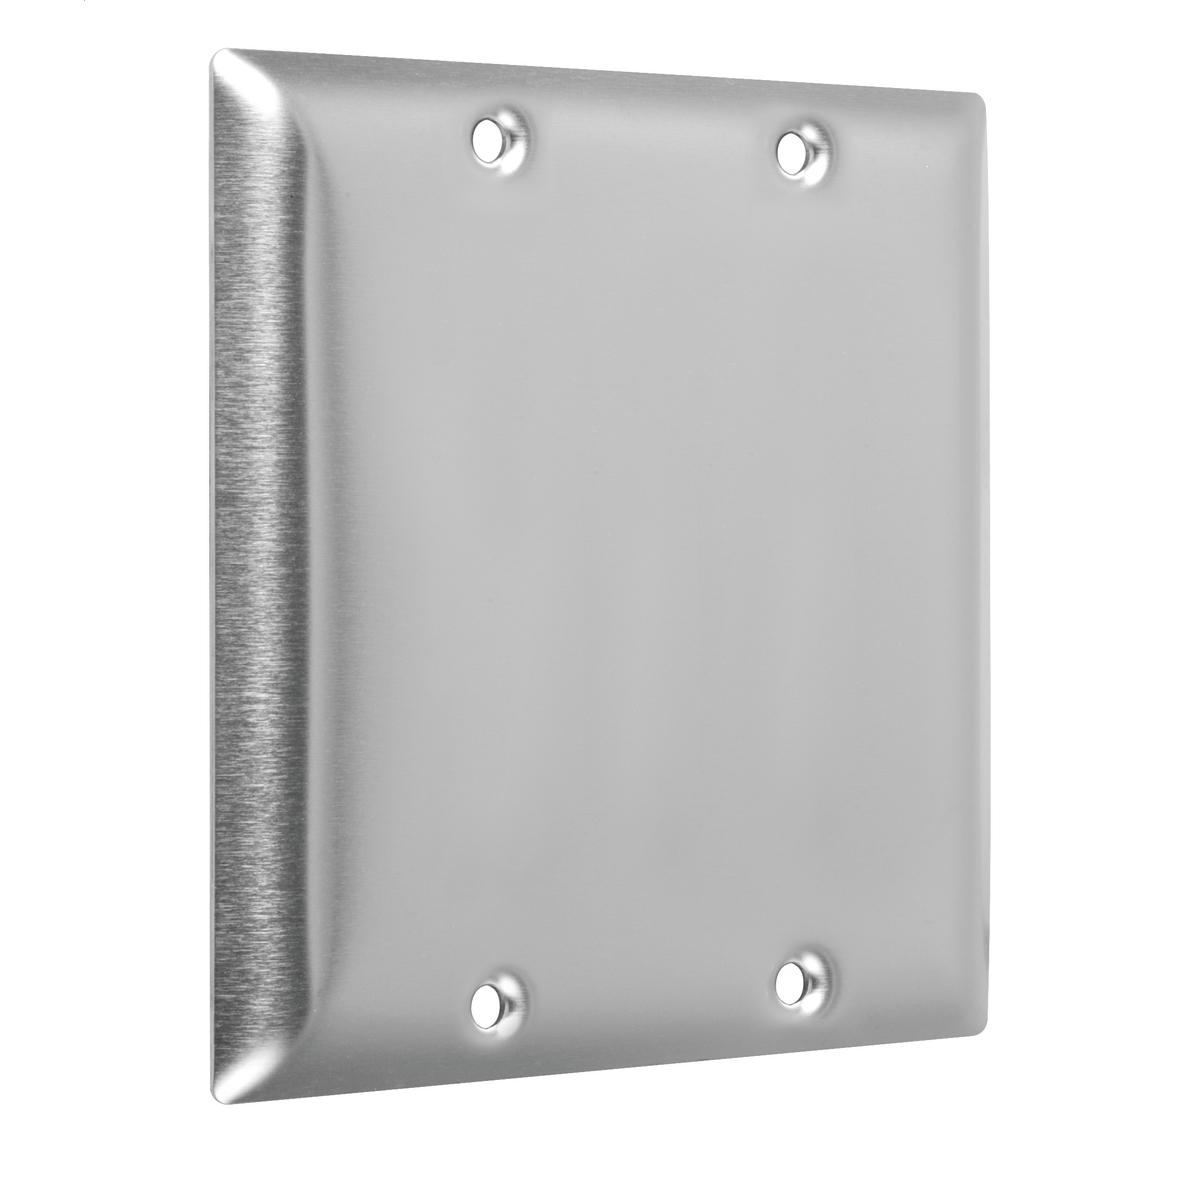 Hubbell WSS-BB 2-Gang Metal Wallplate, Standard, 2-Blank, Stainless Steel  ; Easily primed and painted to match or complement walls. ; Won't bow, crack or distort during installation. ; Premium North American powder coat. ; Includes screw(s) in matching finish.